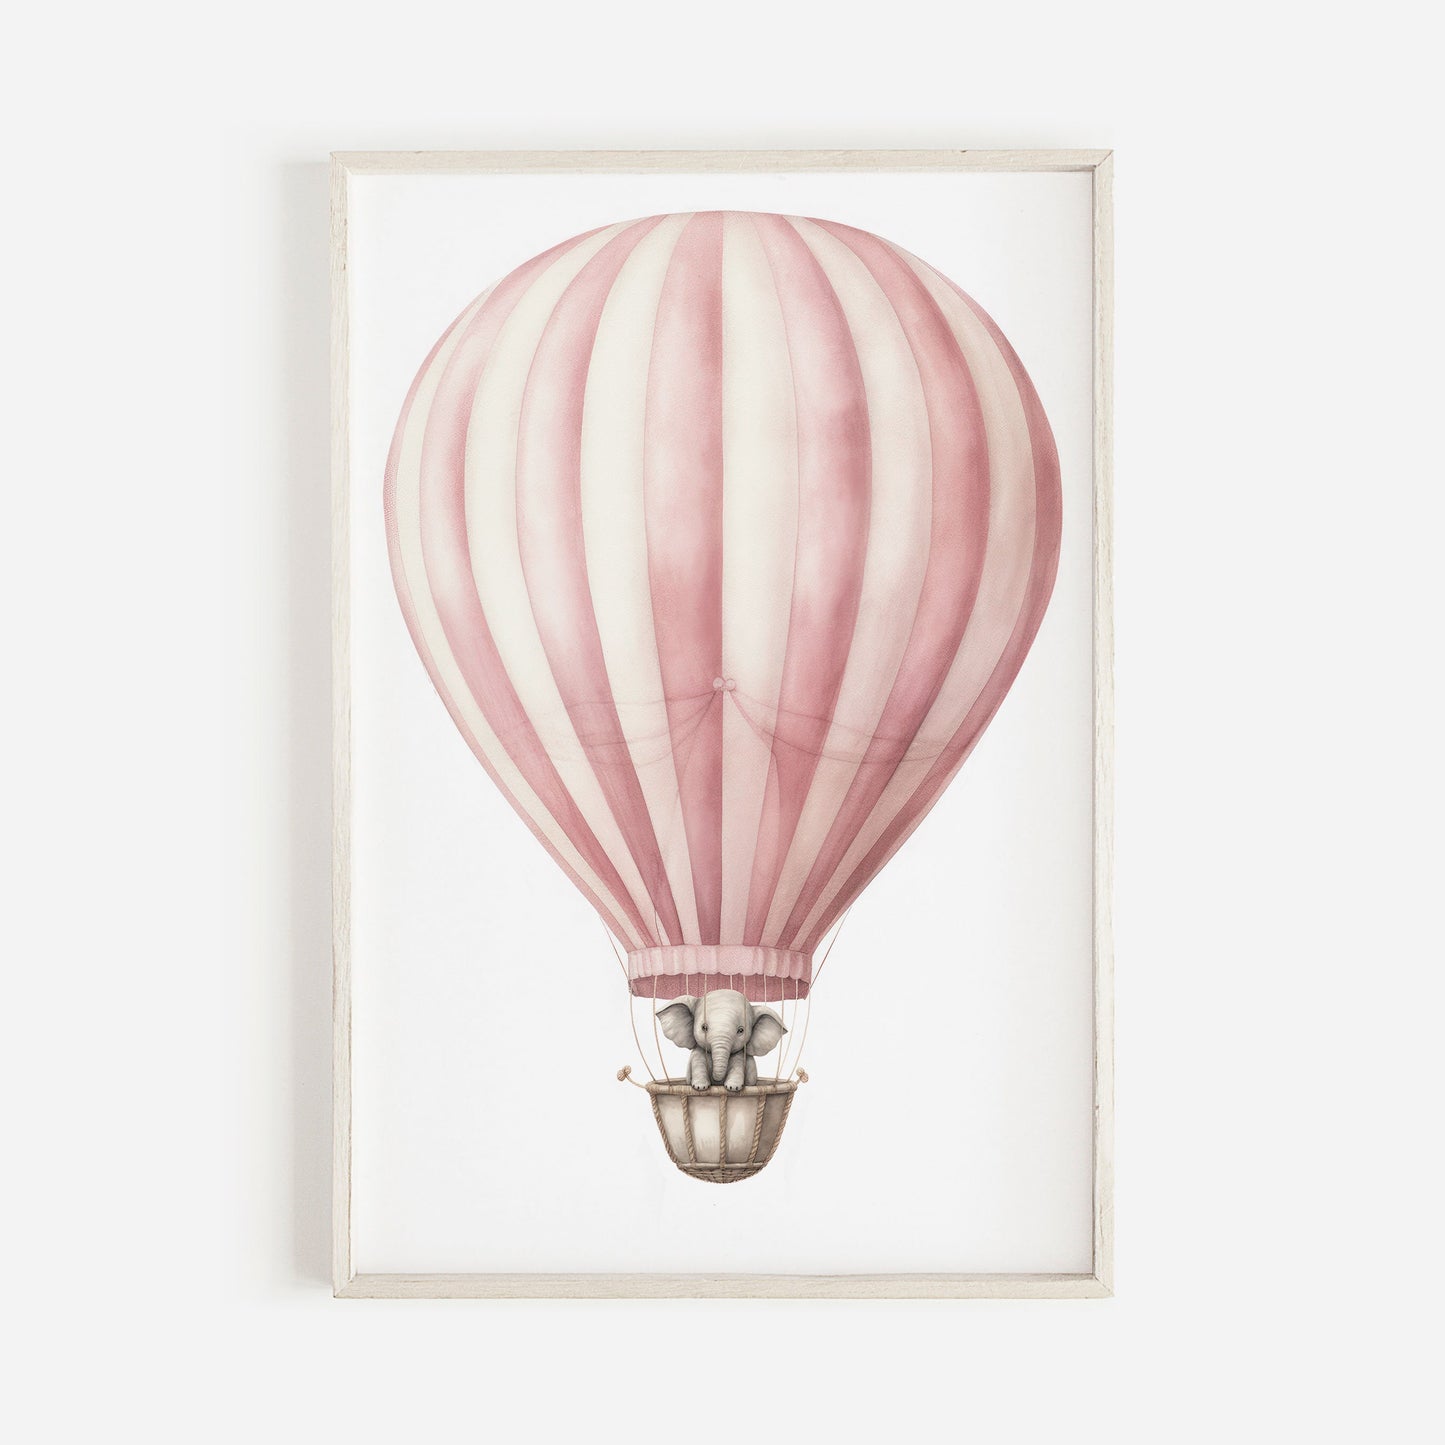 Up & Away: Vintage Baby Elephant Hot Air Balloon Art - High-Res Digital Printable - Create a Whimsical Oasis for Your Little One!